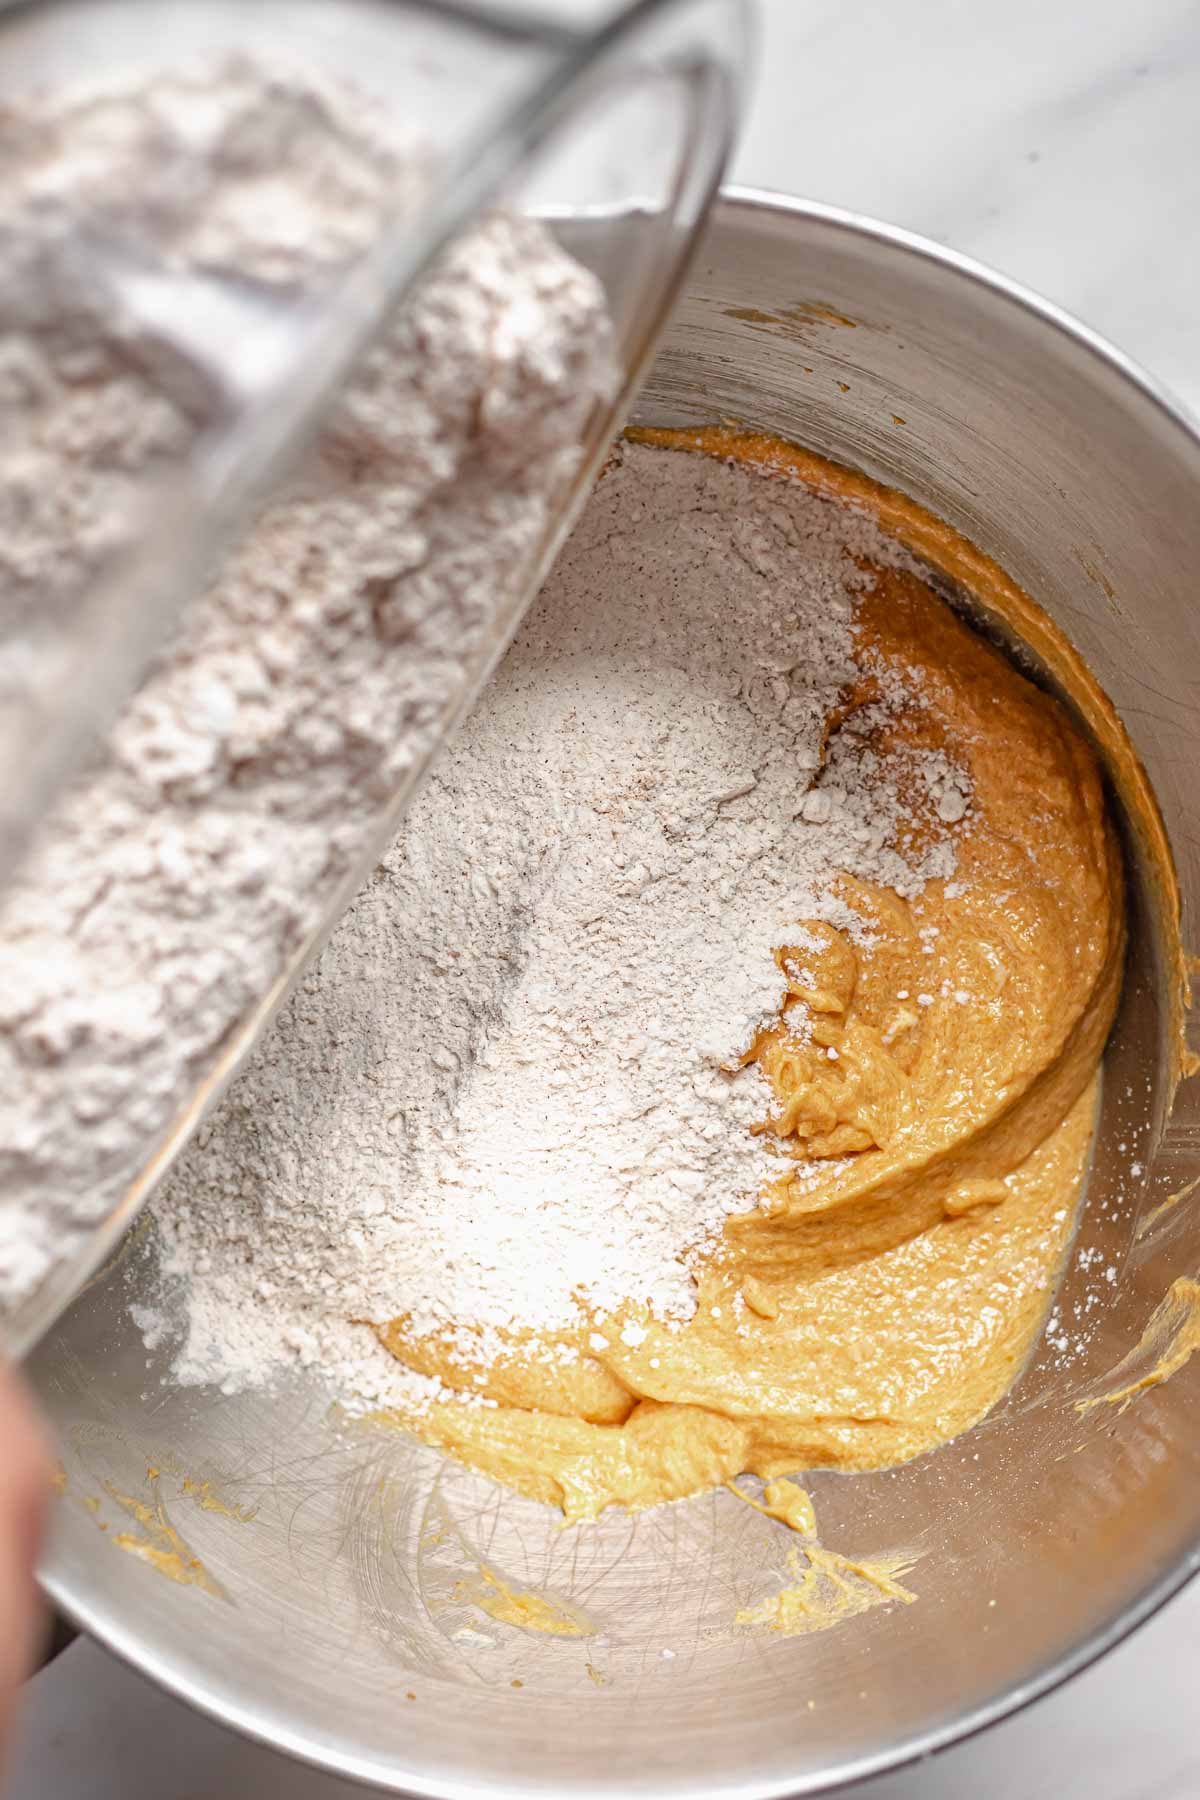 Flour mixture being added to the batter in a bowl.